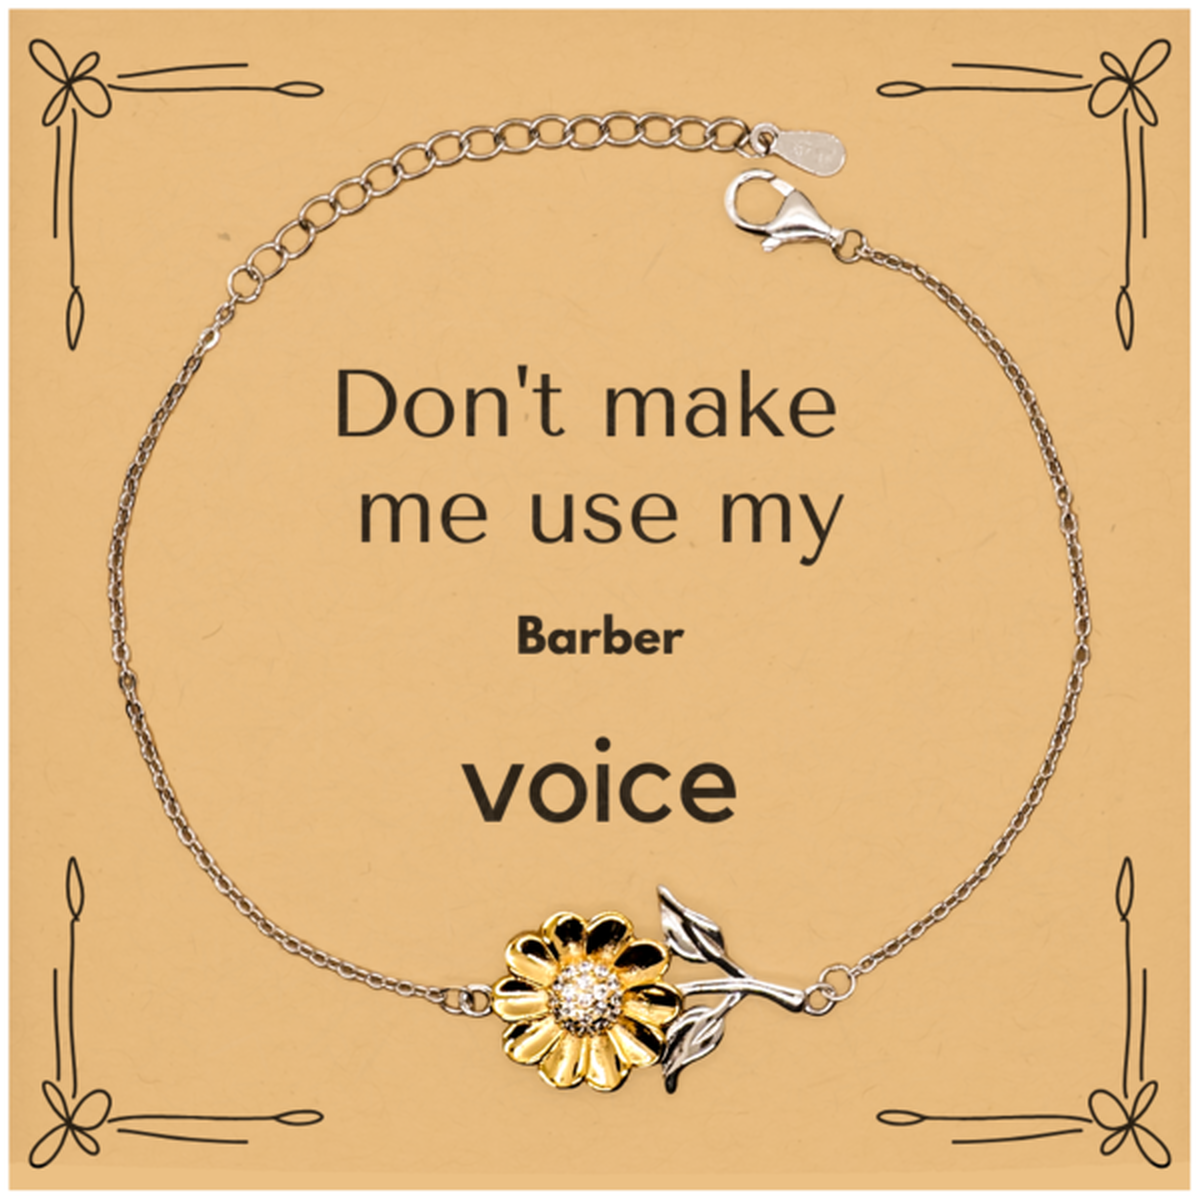 Don't make me use my Barber voice, Sarcasm Barber Card Gifts, Christmas Barber Sunflower Bracelet Birthday Unique Gifts For Barber Coworkers, Men, Women, Colleague, Friends